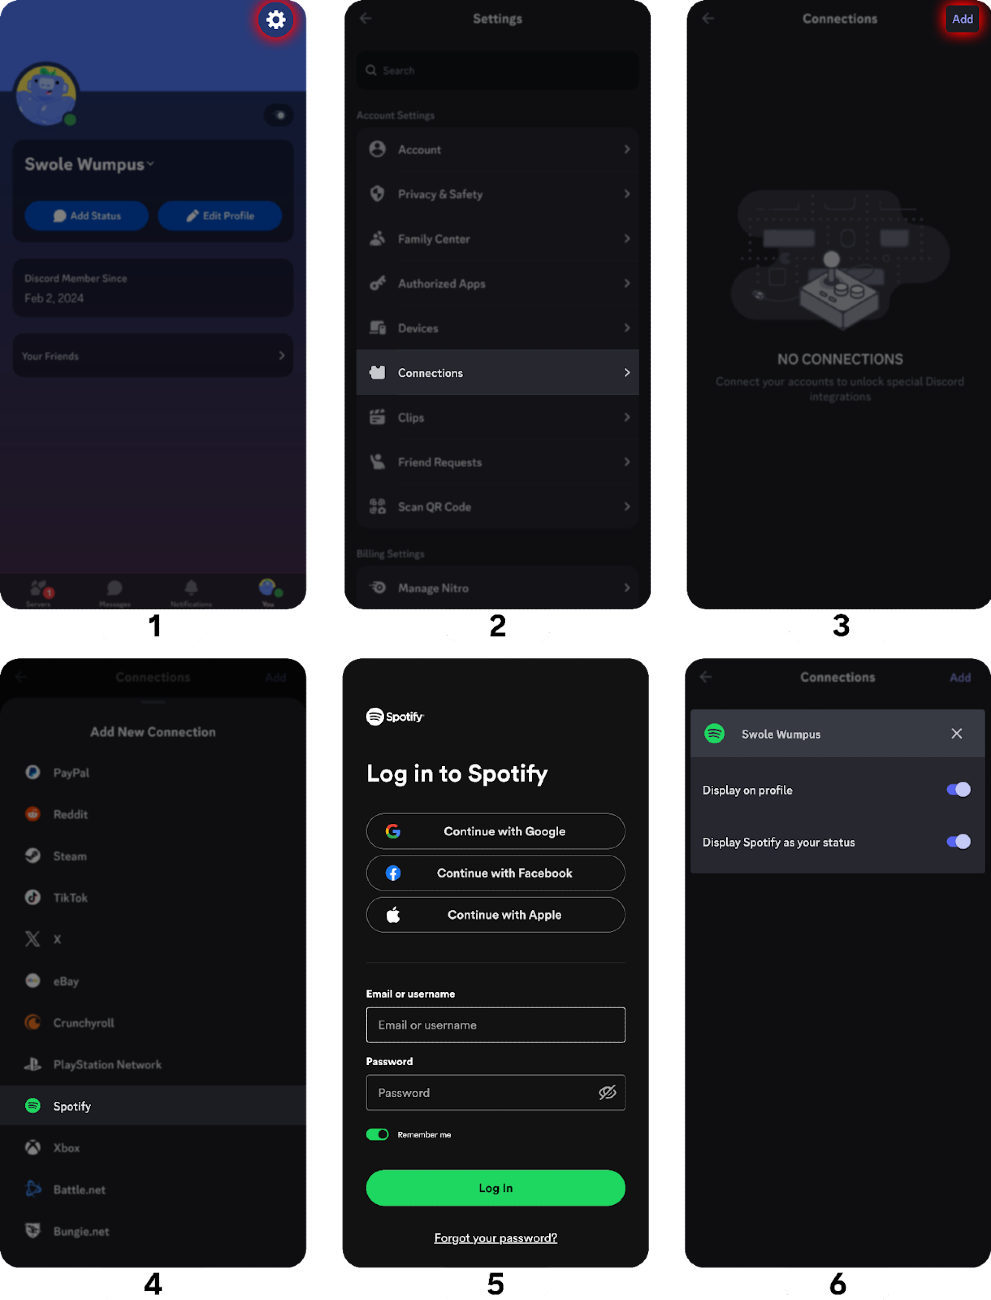 Steps of connecting a Spotify account to a Discord account on mobile